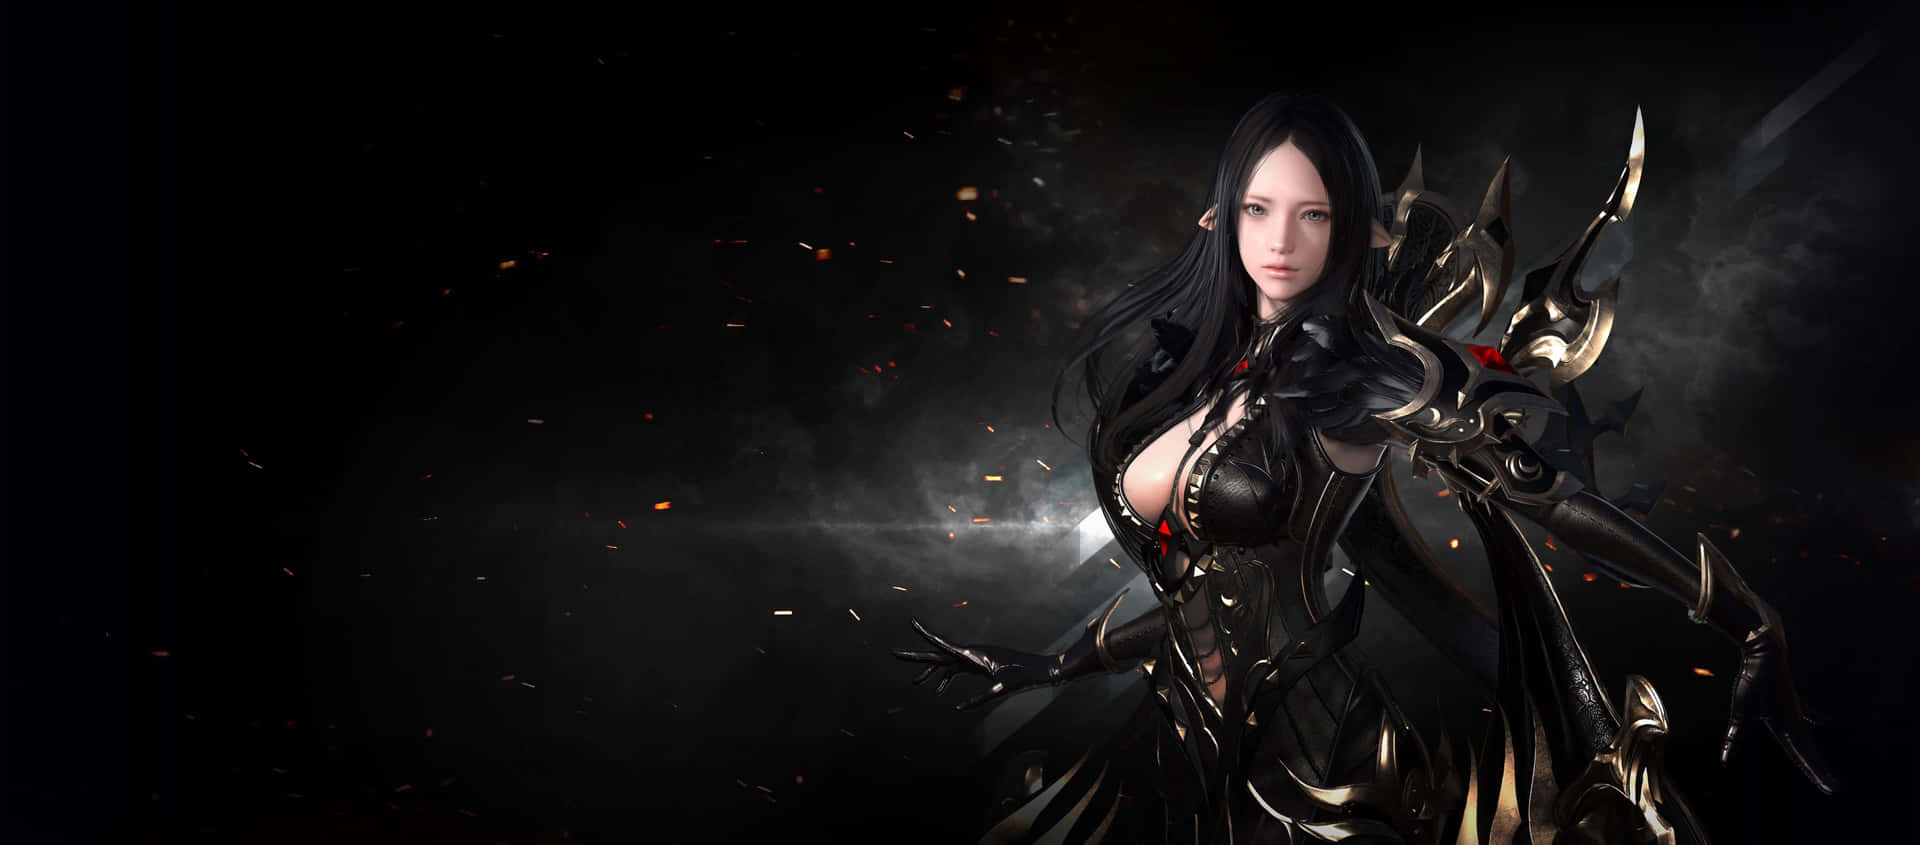 A Woman In Black Armor With Swords Wallpaper